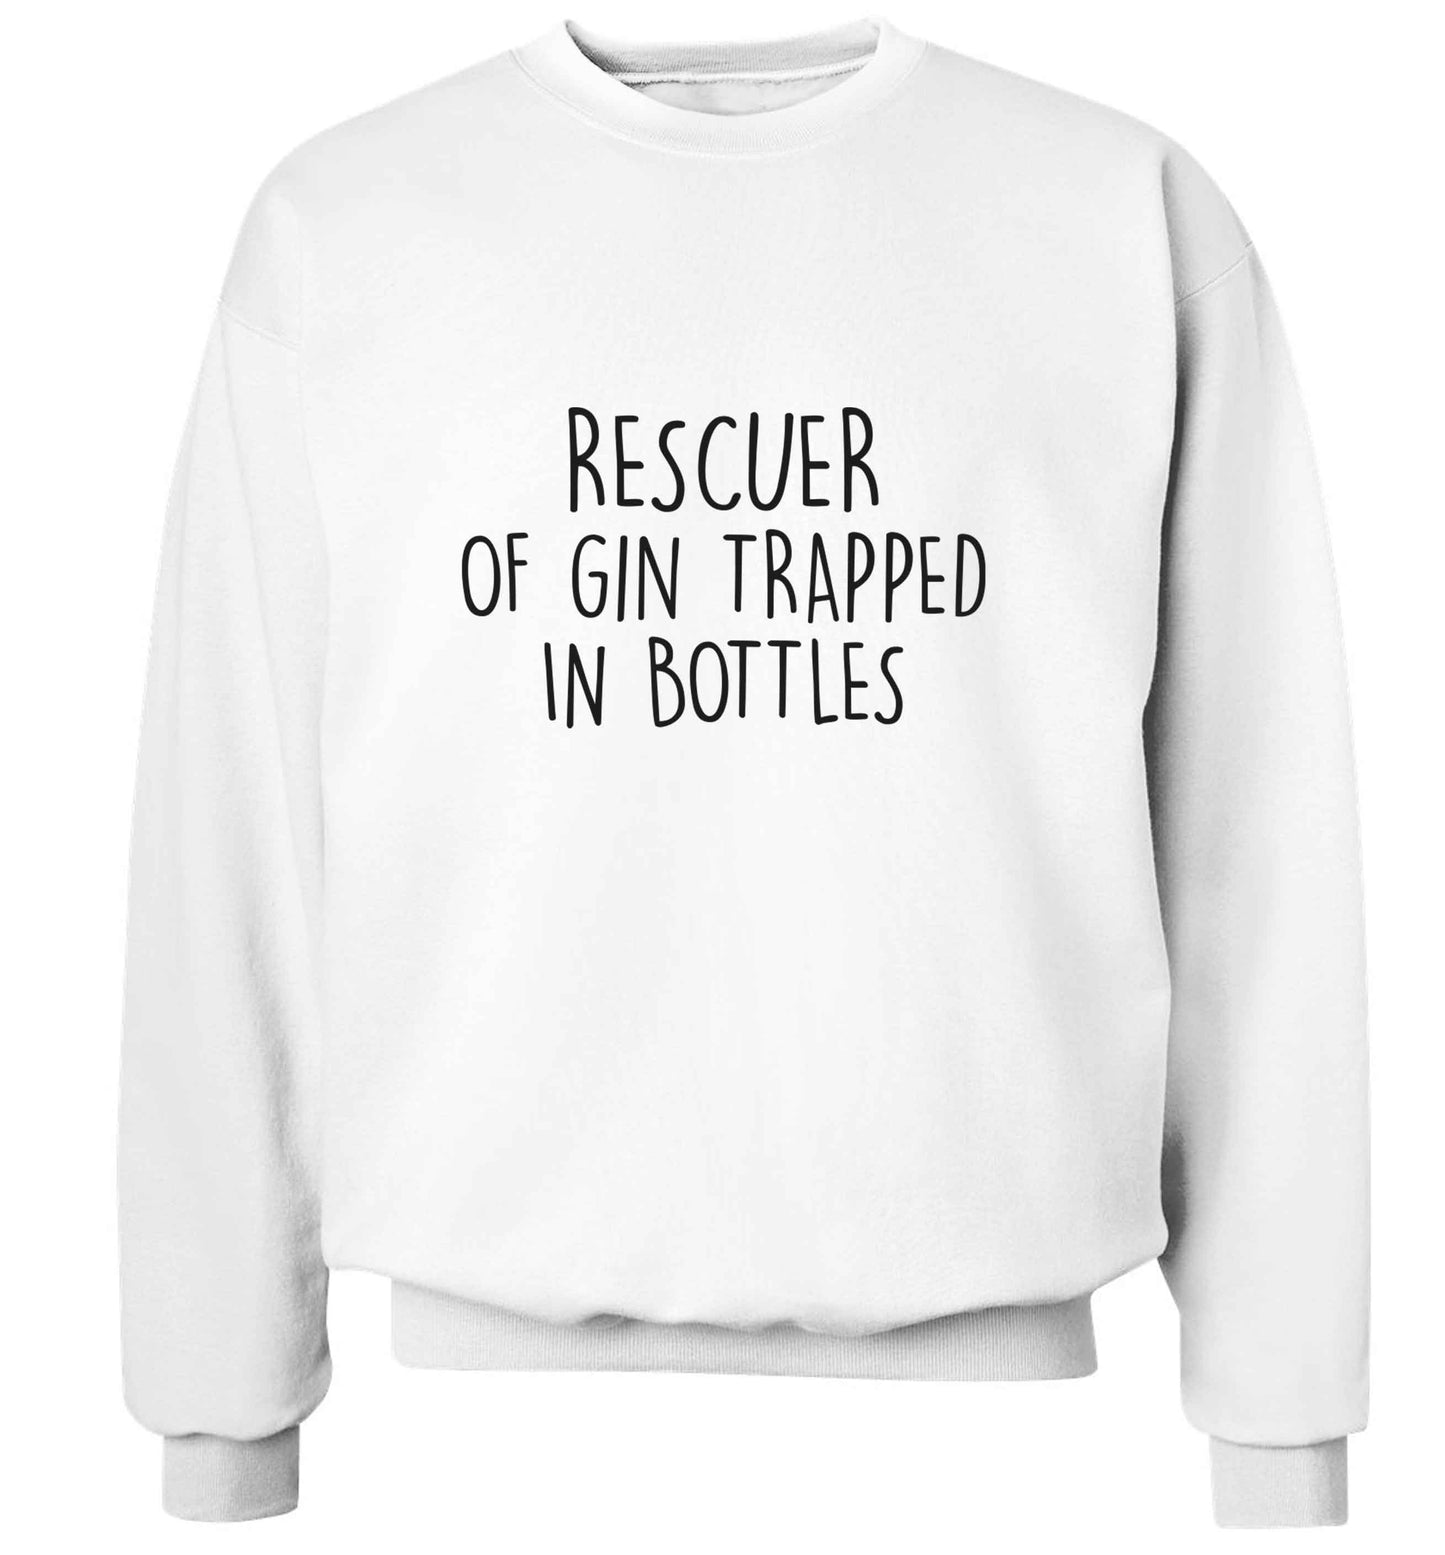 Rescuer of gin trapped in bottles adult's unisex white sweater 2XL